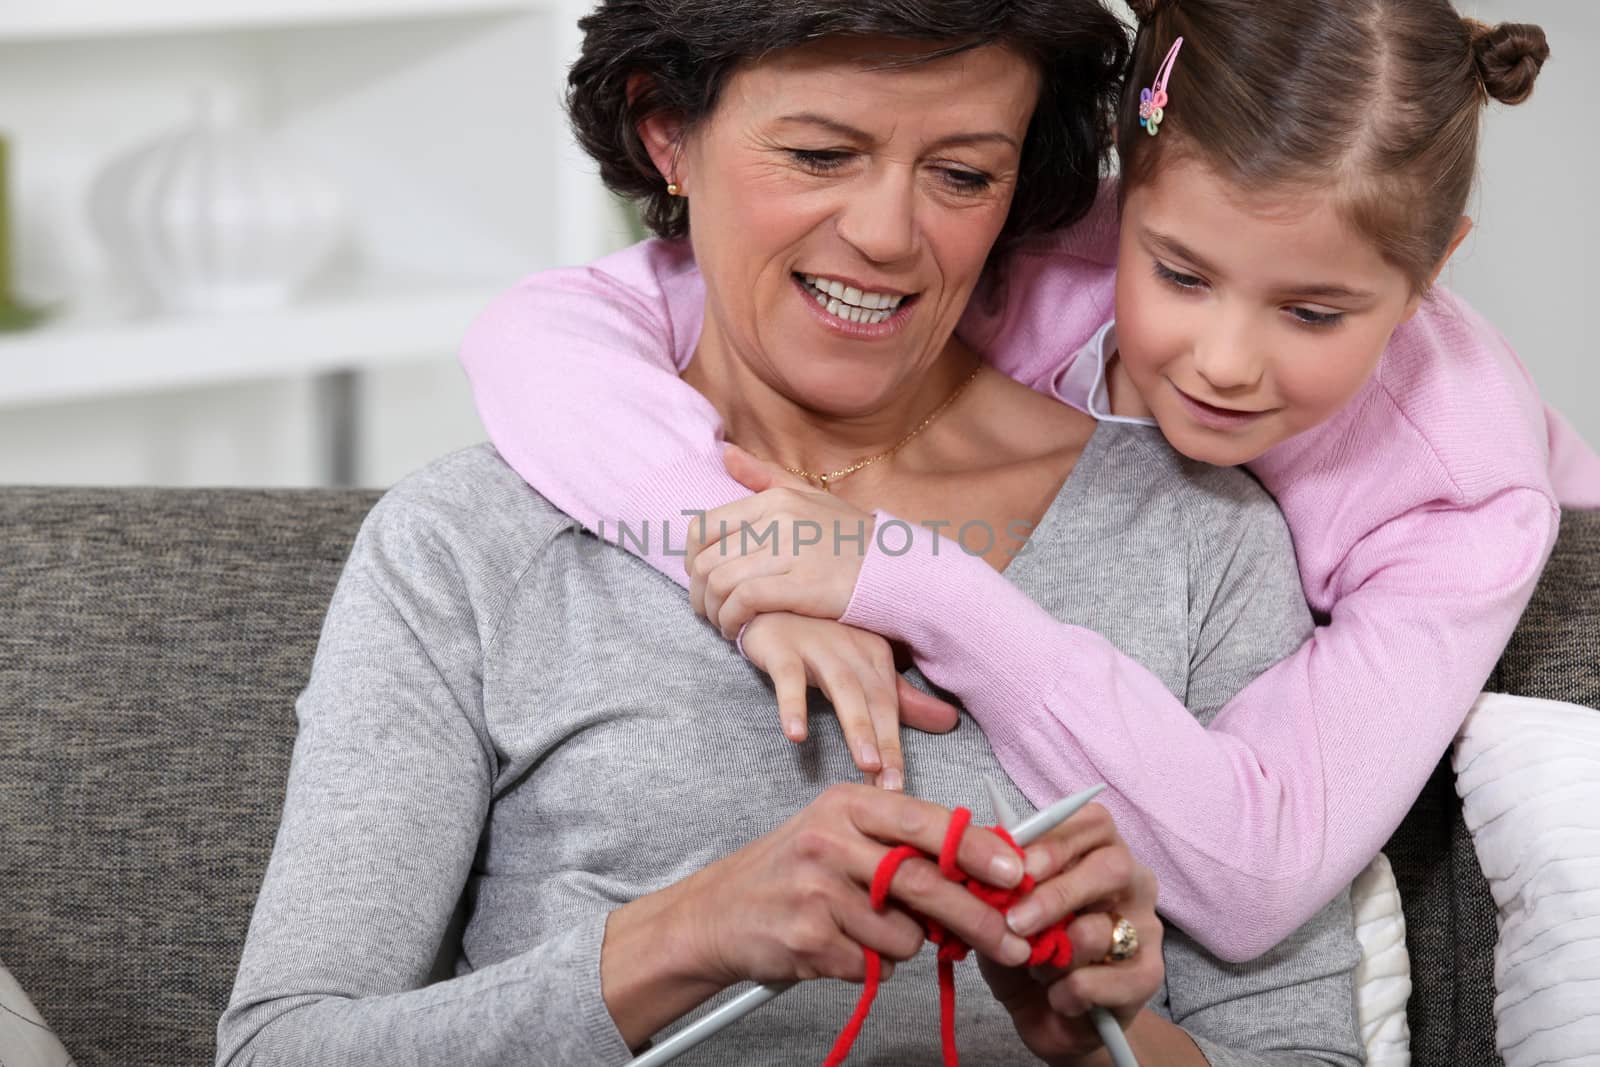 A mom showing how to knit to her daughter. by phovoir